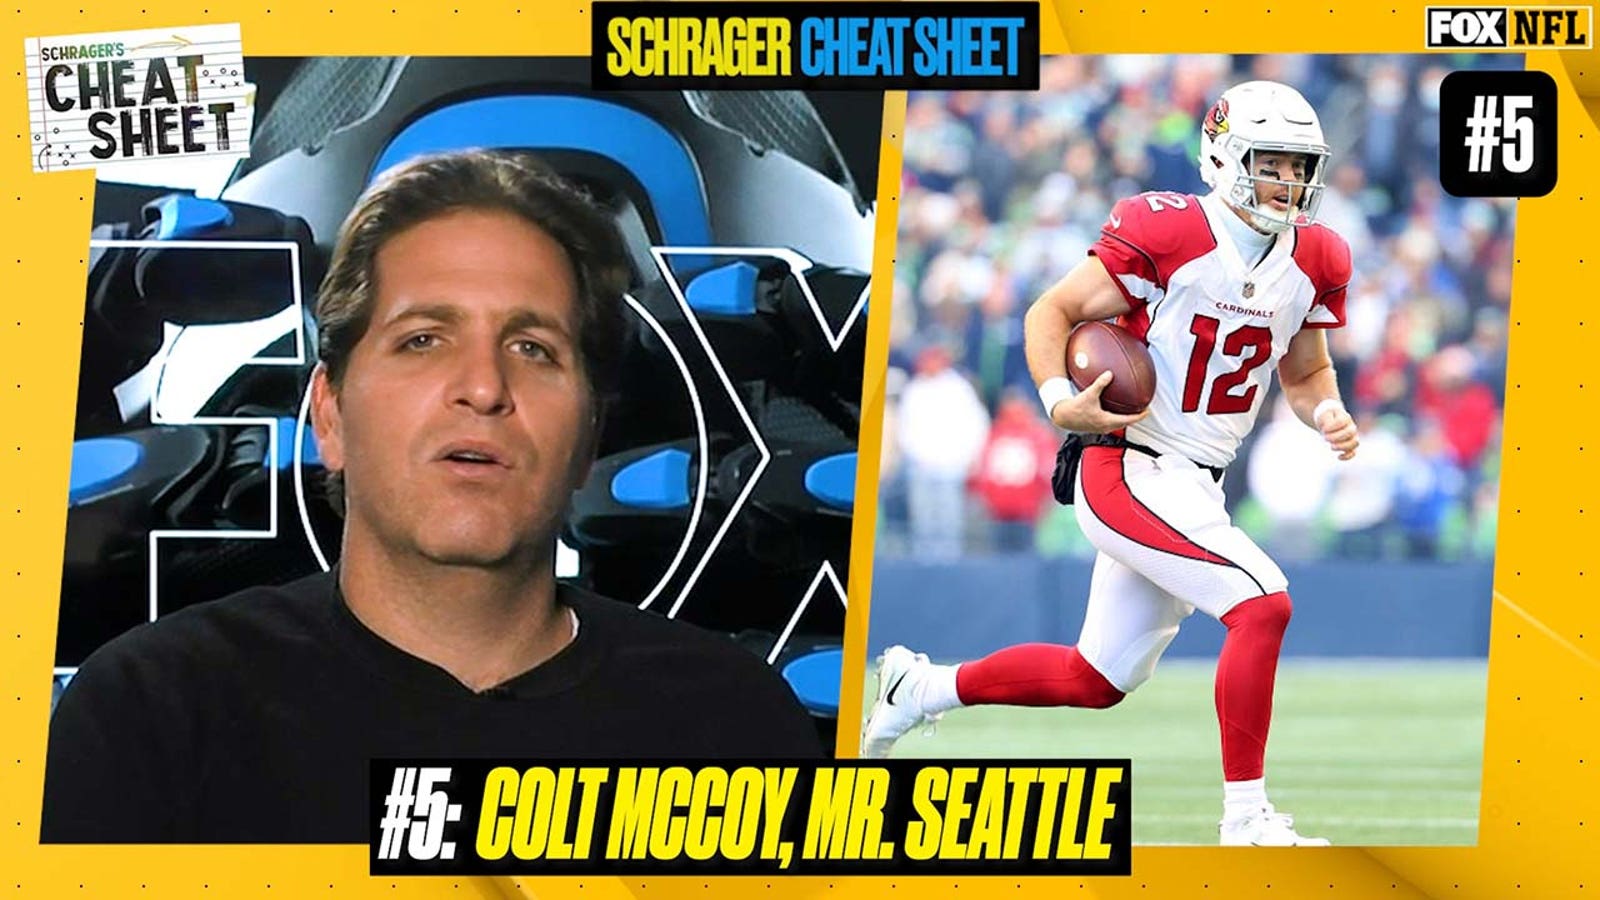 Peter Schrager praises Colt McCoy for keeping the Cardinals atop the NFC I Cheat Sheet for Week 12